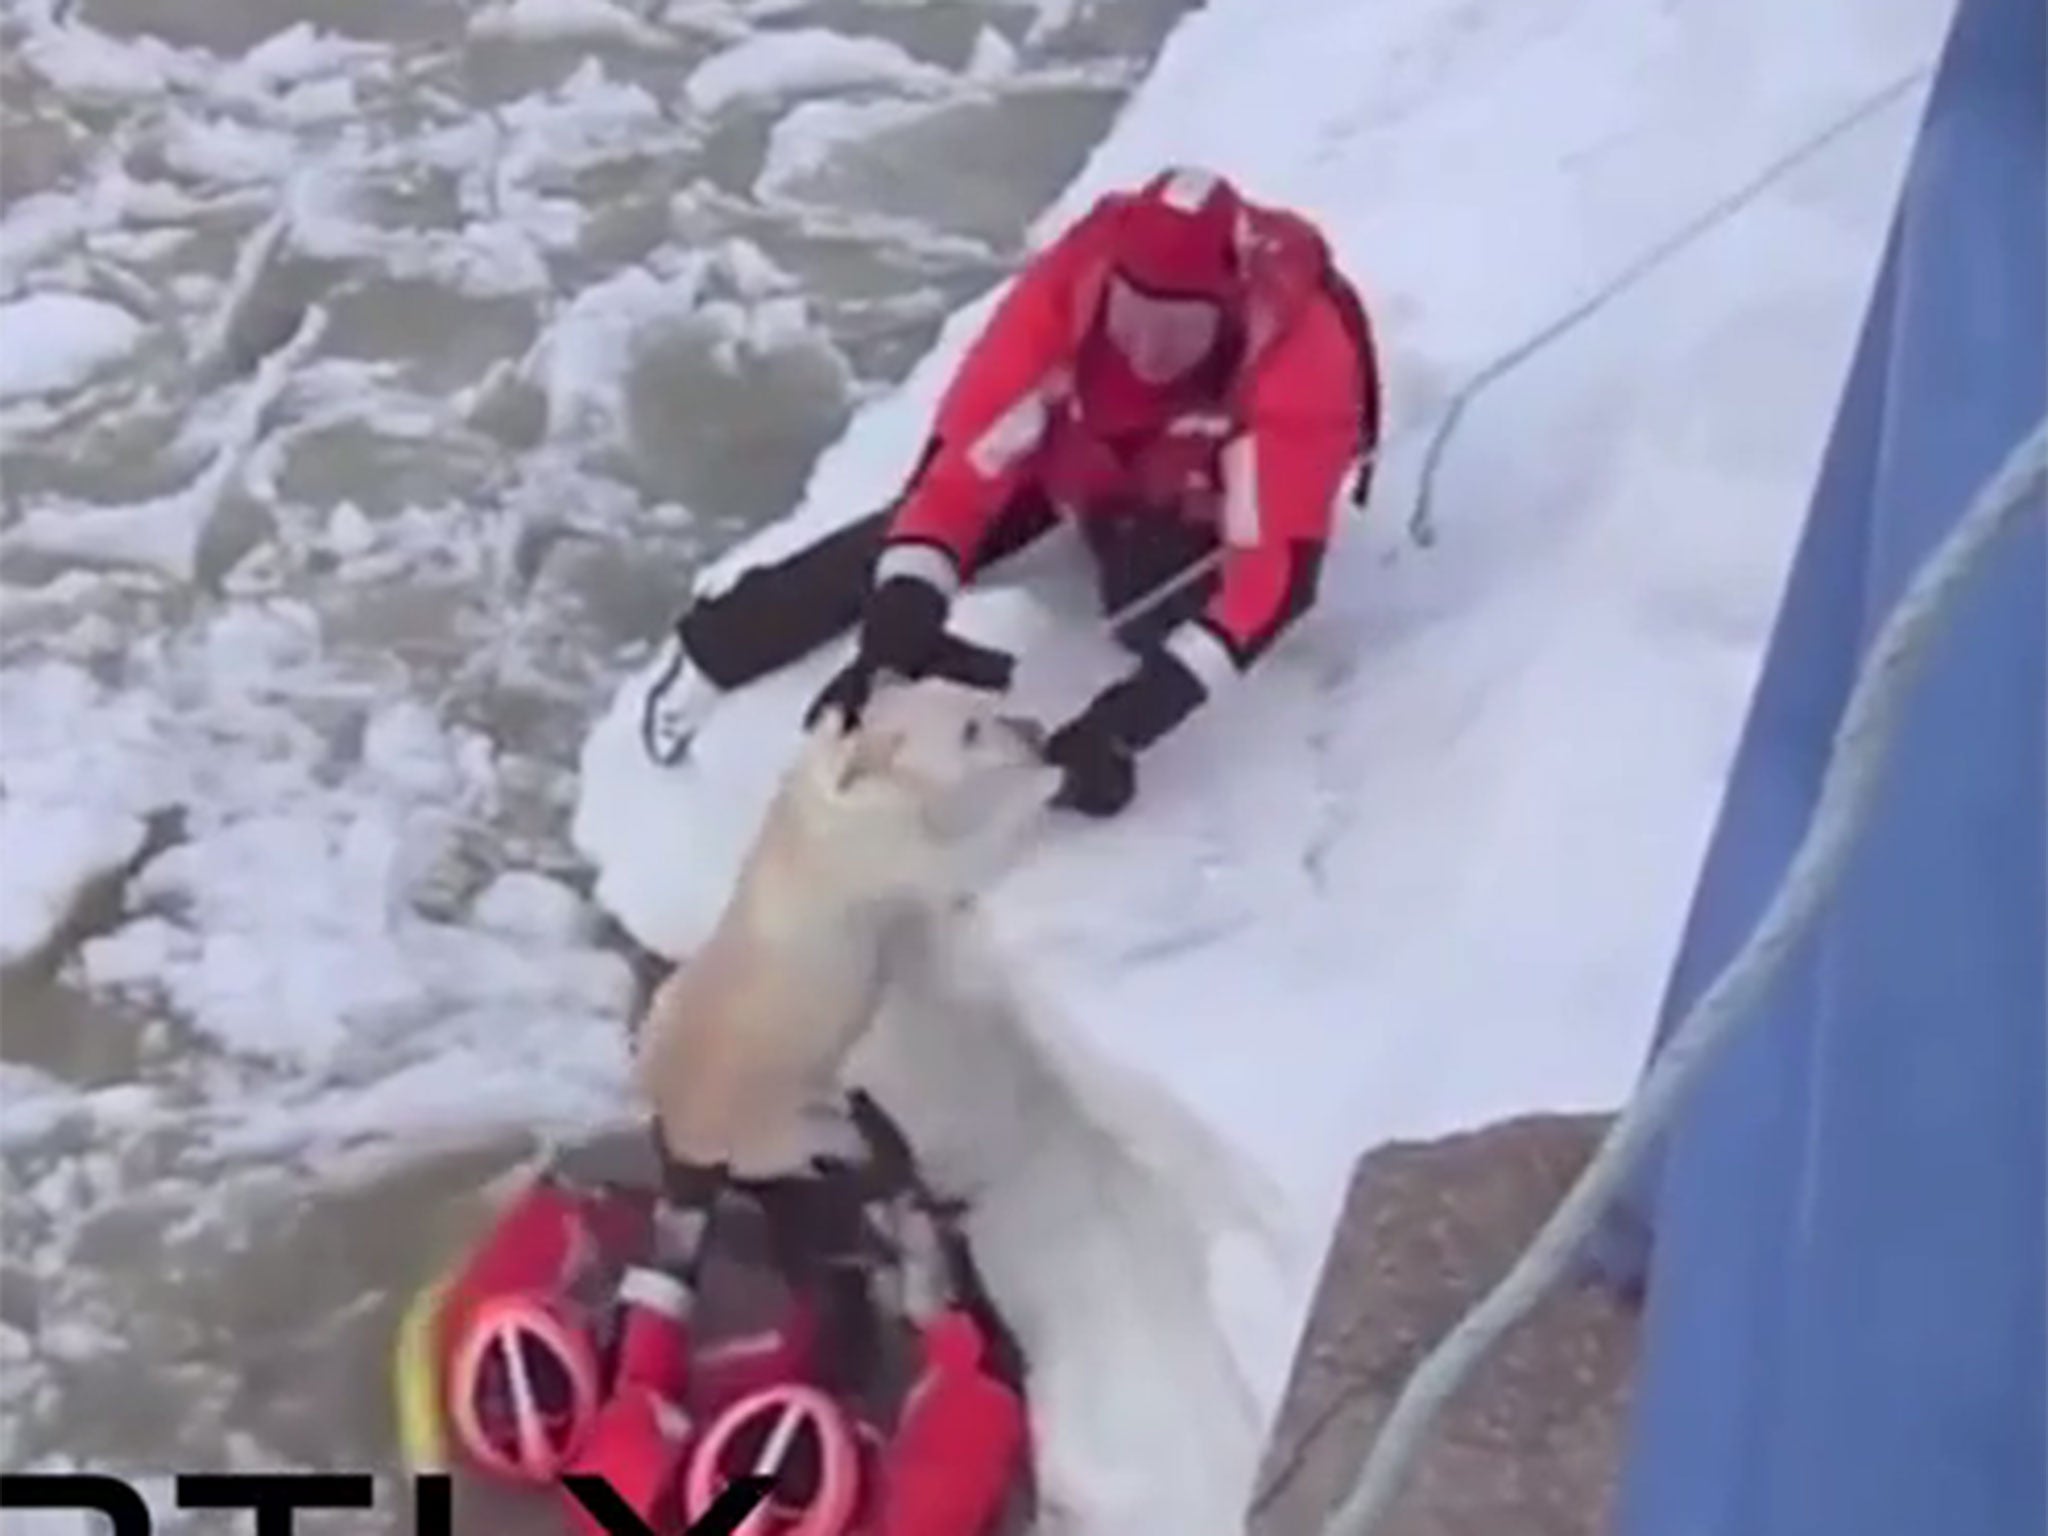 The unidentified Labrador being pulled out of the the freezing river